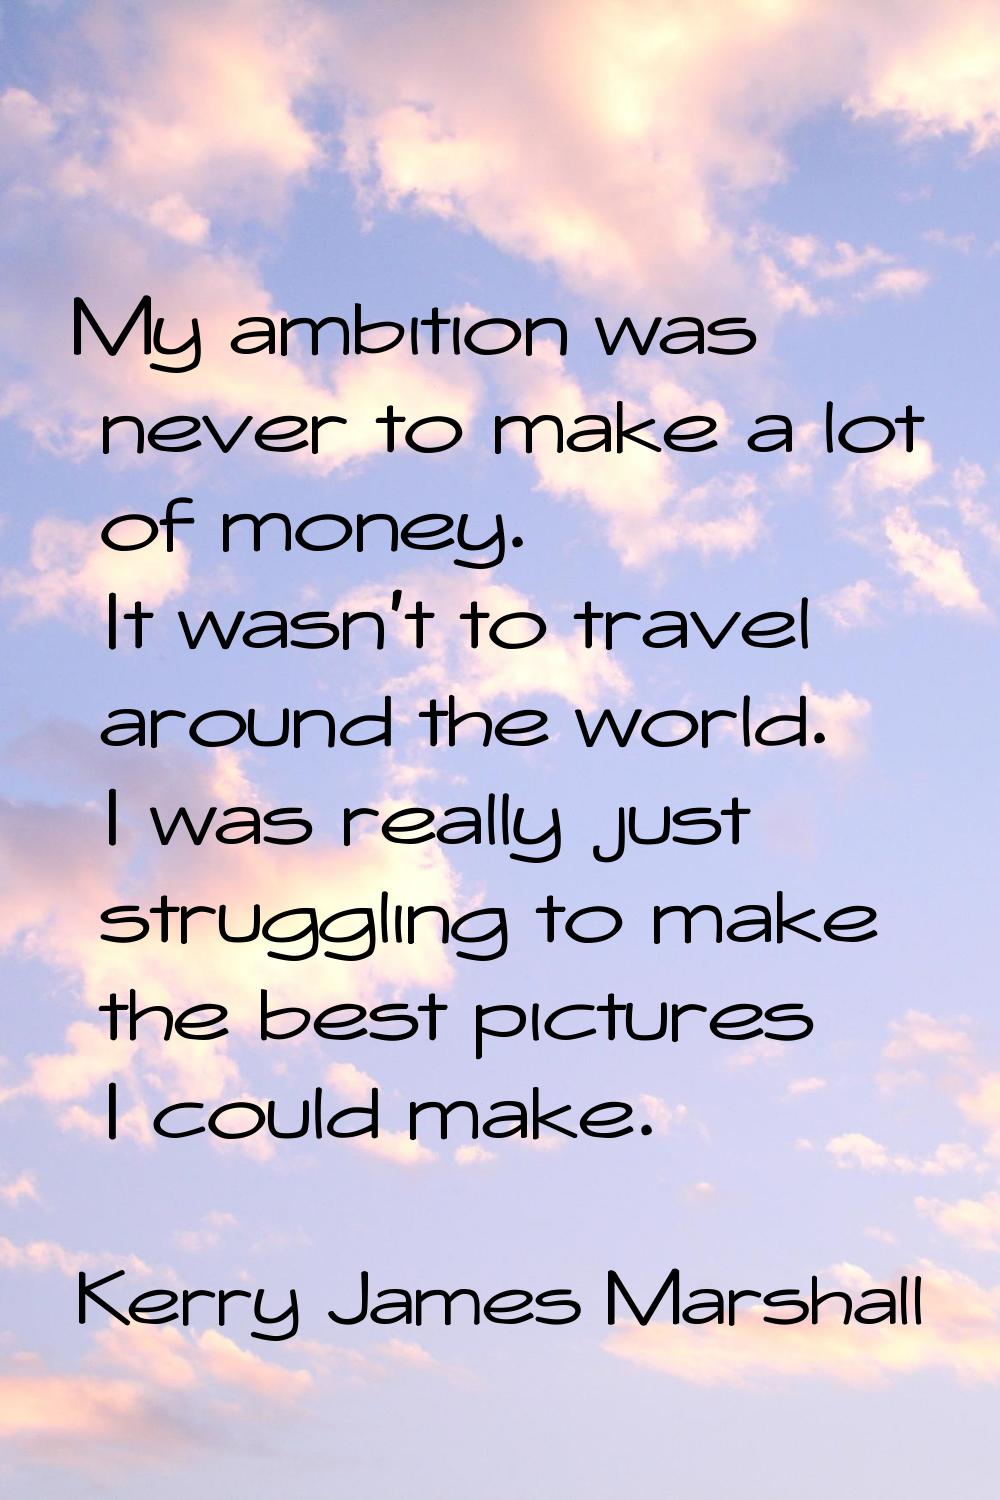 My ambition was never to make a lot of money. It wasn't to travel around the world. I was really ju